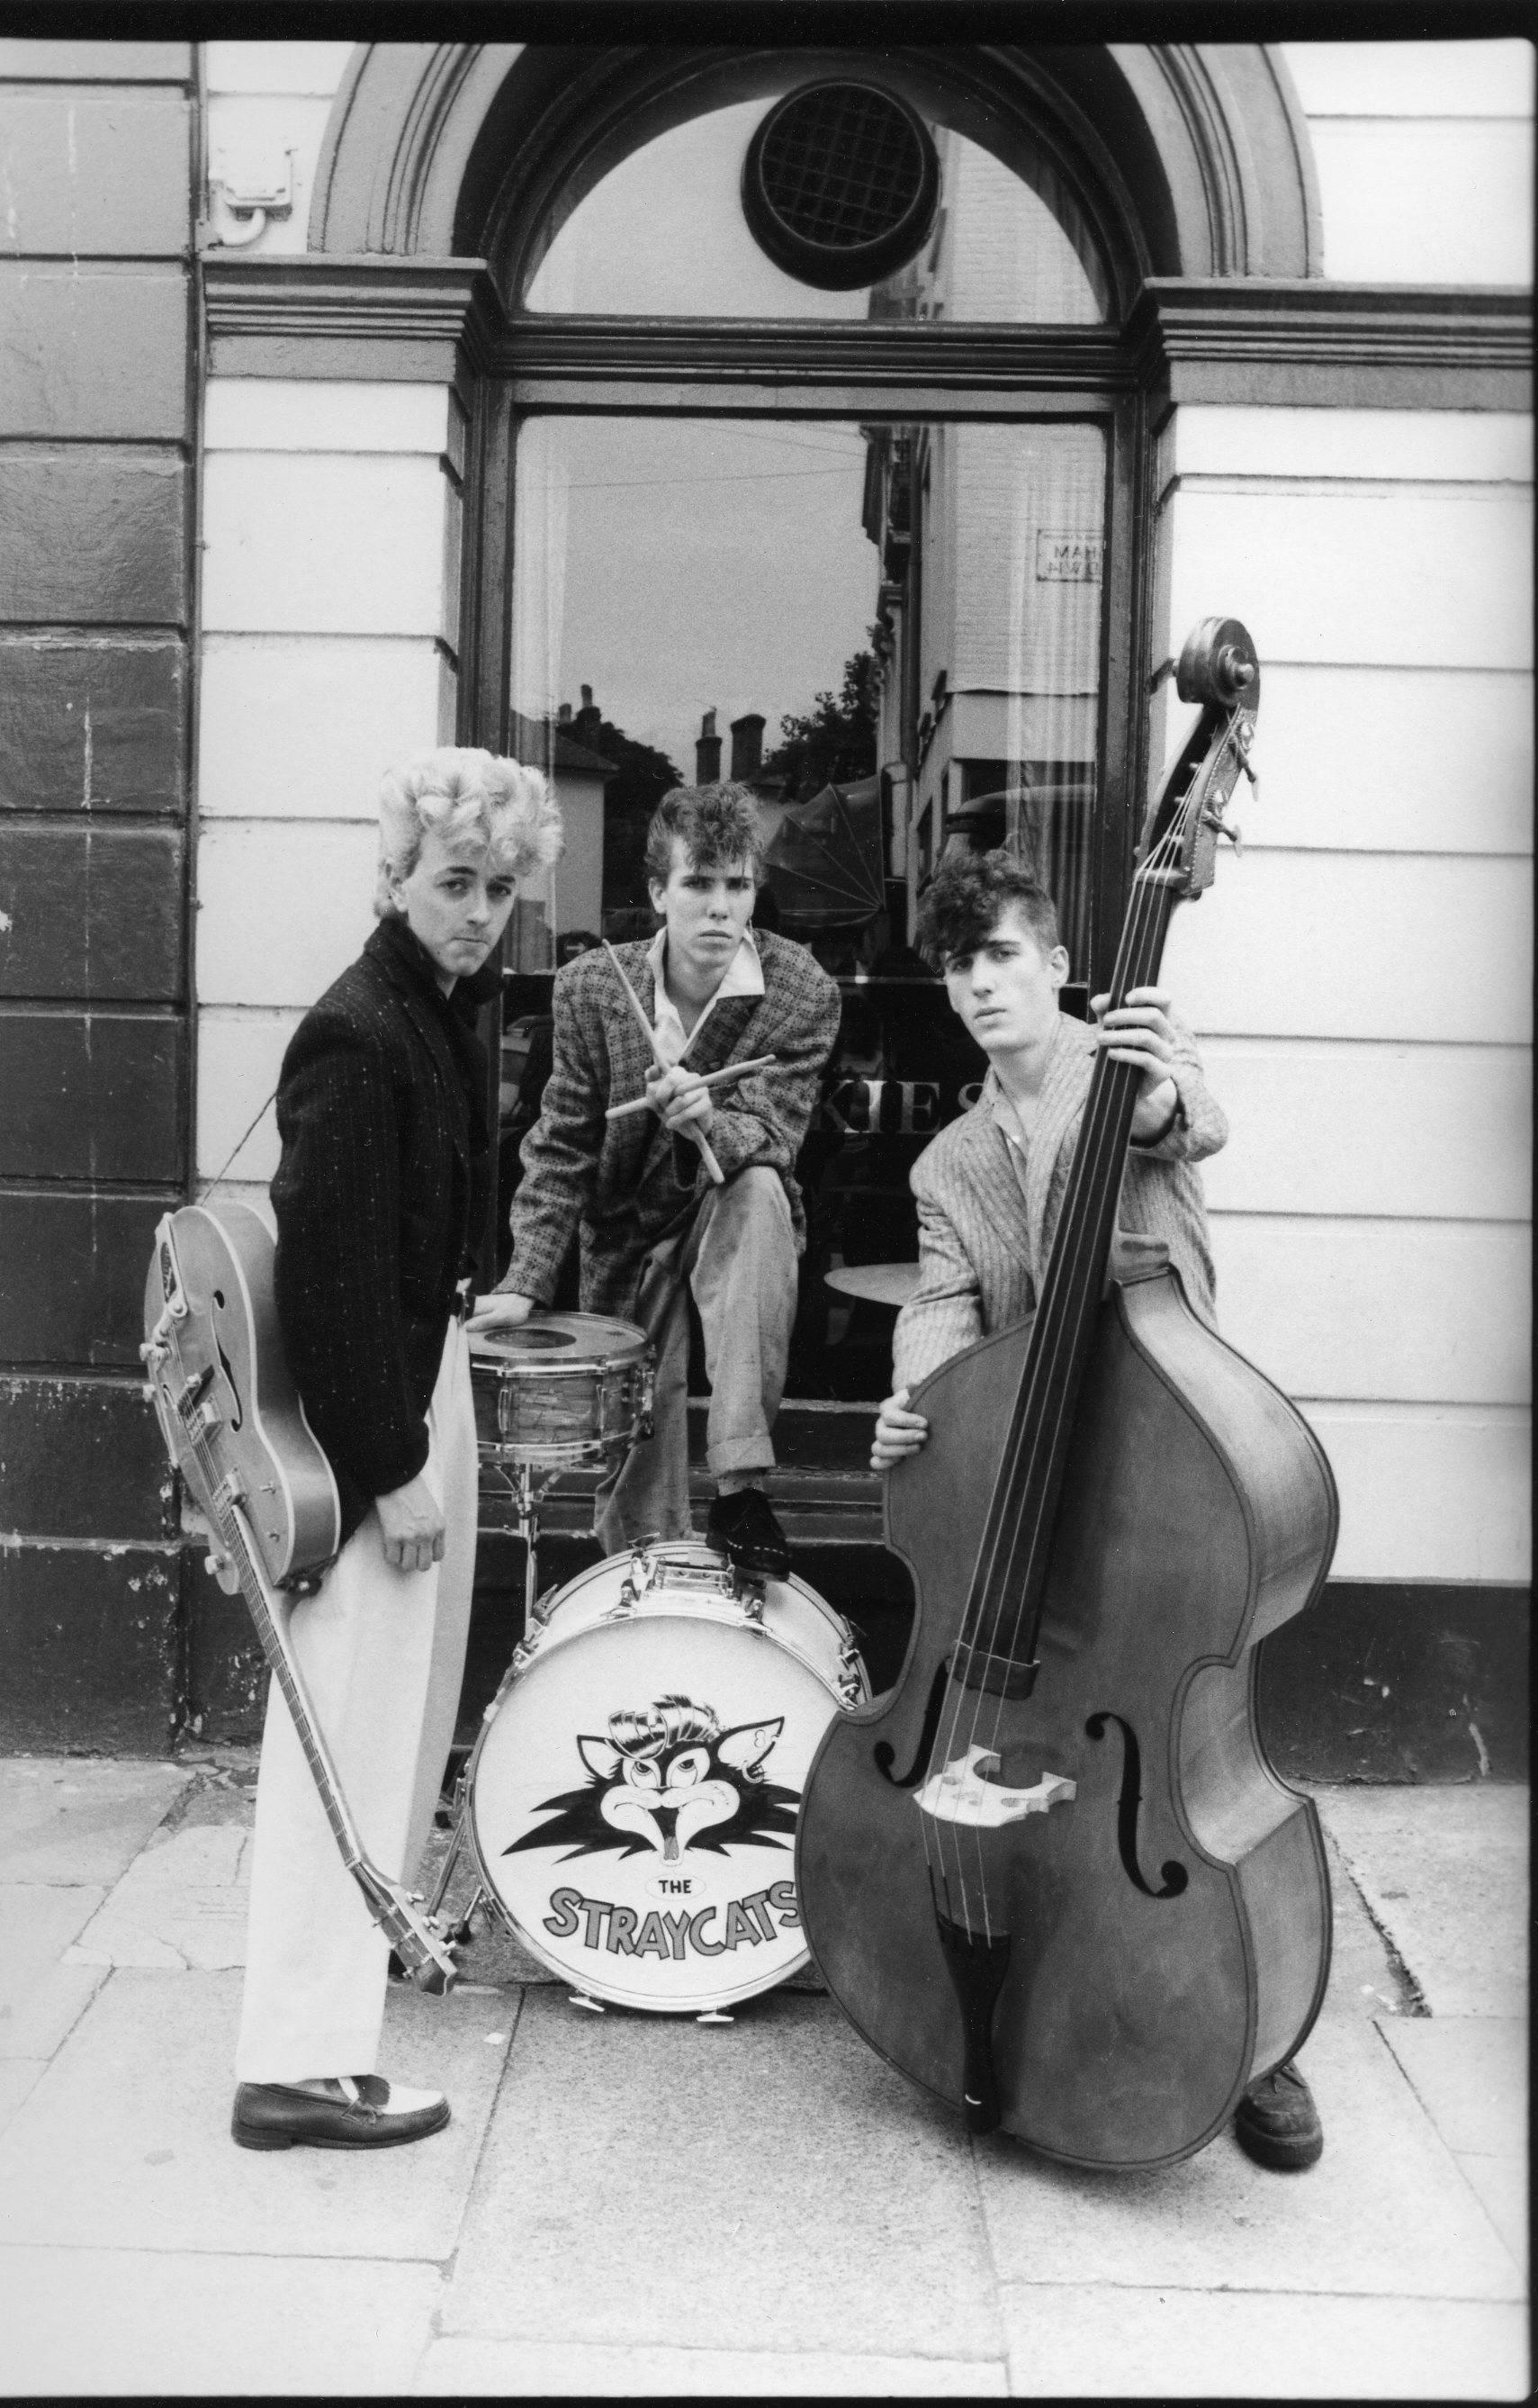 Unknown Black and White Photograph - Oversized Vintage Original Stray Cats Photograph